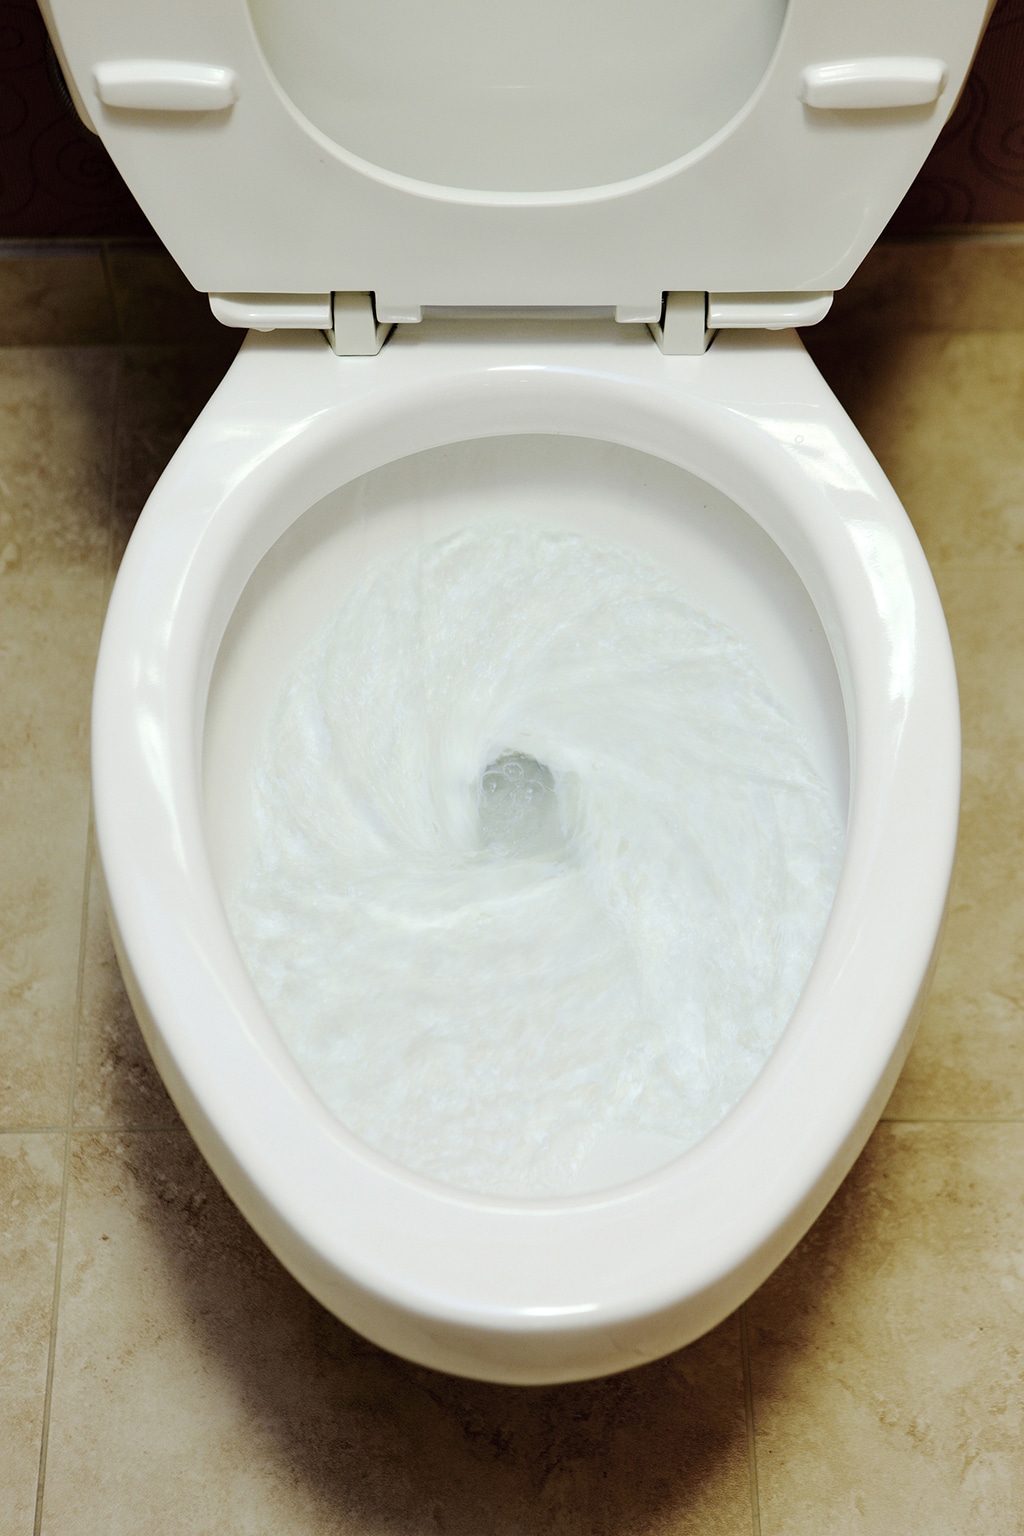 When Your Toilet Makes Unusual Noises, Don’t Guess! Call A Plumber For Professional Help | Grapevine, TX